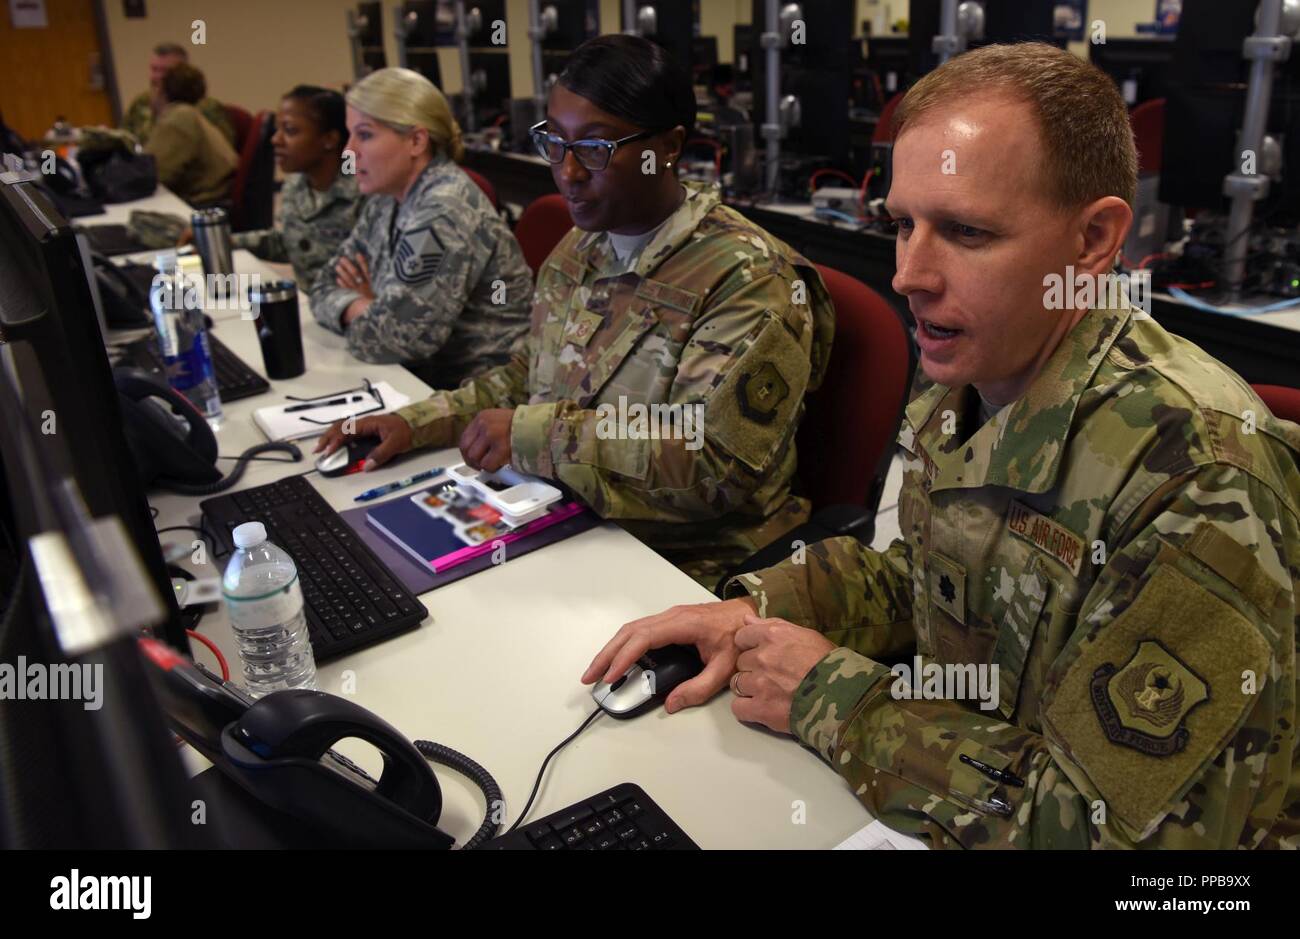 U.S. Airmen with the Ninth Air Force J-1 Manpower and Personnel Directorate discuss the Staff Exercise (STAFFEX) 18-5 joint manning document (JMD) for the exercise scenario located in the U.S. Southern Command theater, Aug. 15, 2018, Shaw Air Force Base, S.C. The J-1 directorate not only maintains the JMD but is also the focal point for personnel support actions, as well as manages and synchronizes the level of personnel support provided to the task force during all phases of an operation. STAFFEX 18-5 was the fifth iteration as part of the training plan for Ninth AF to become a Joint Task For Stock Photo